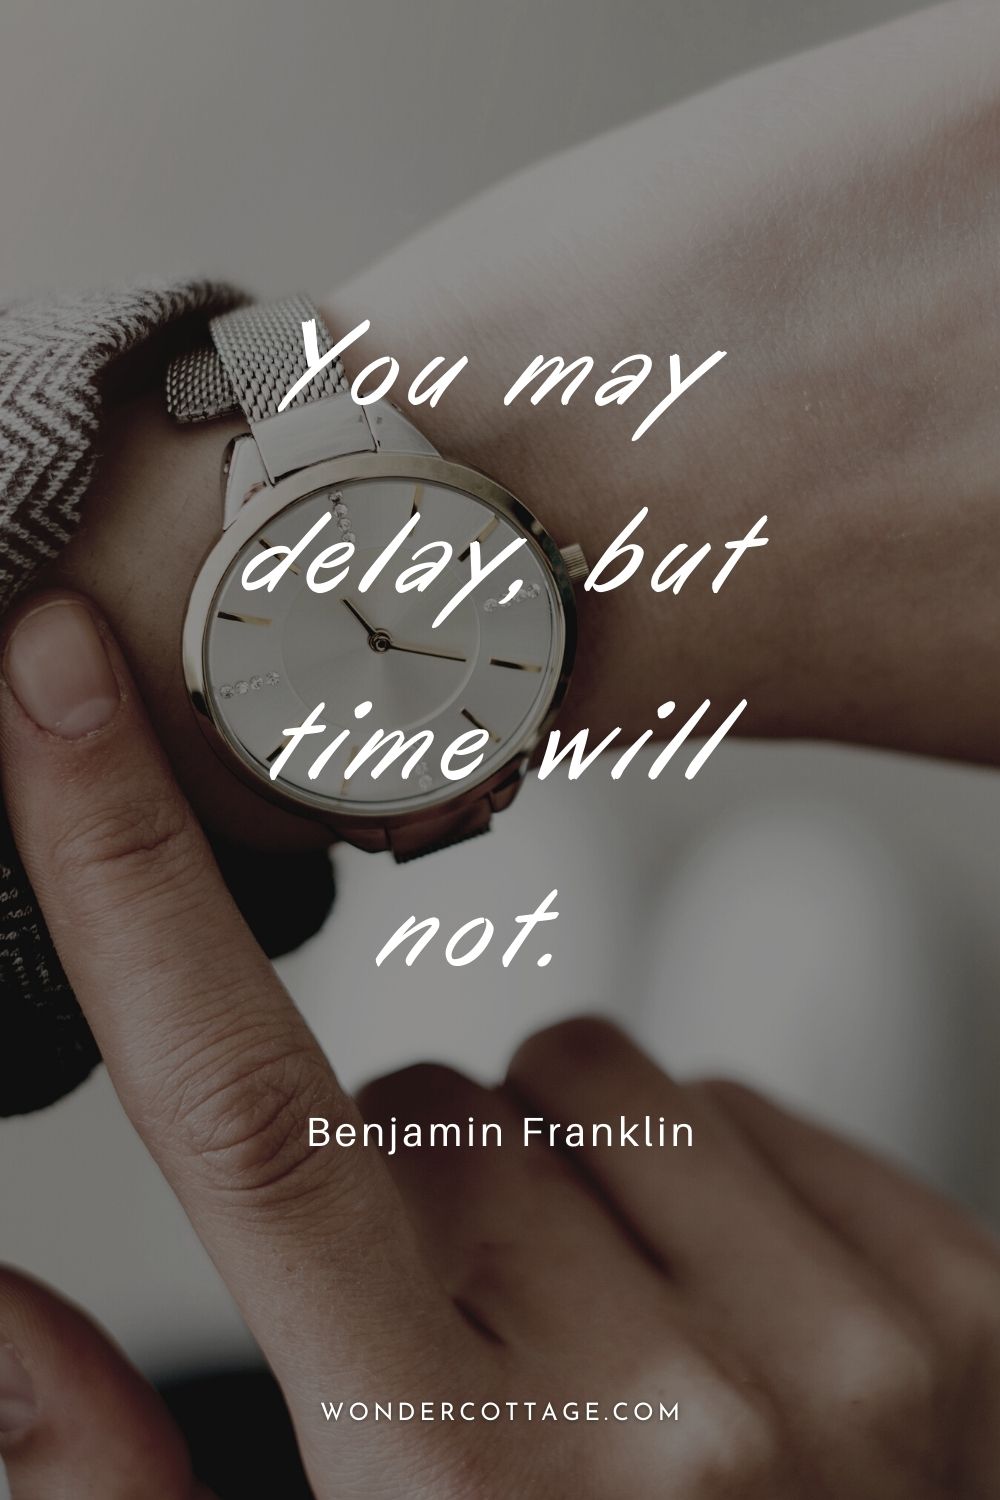 You may delay, but time will not.  Benjamin Franklin